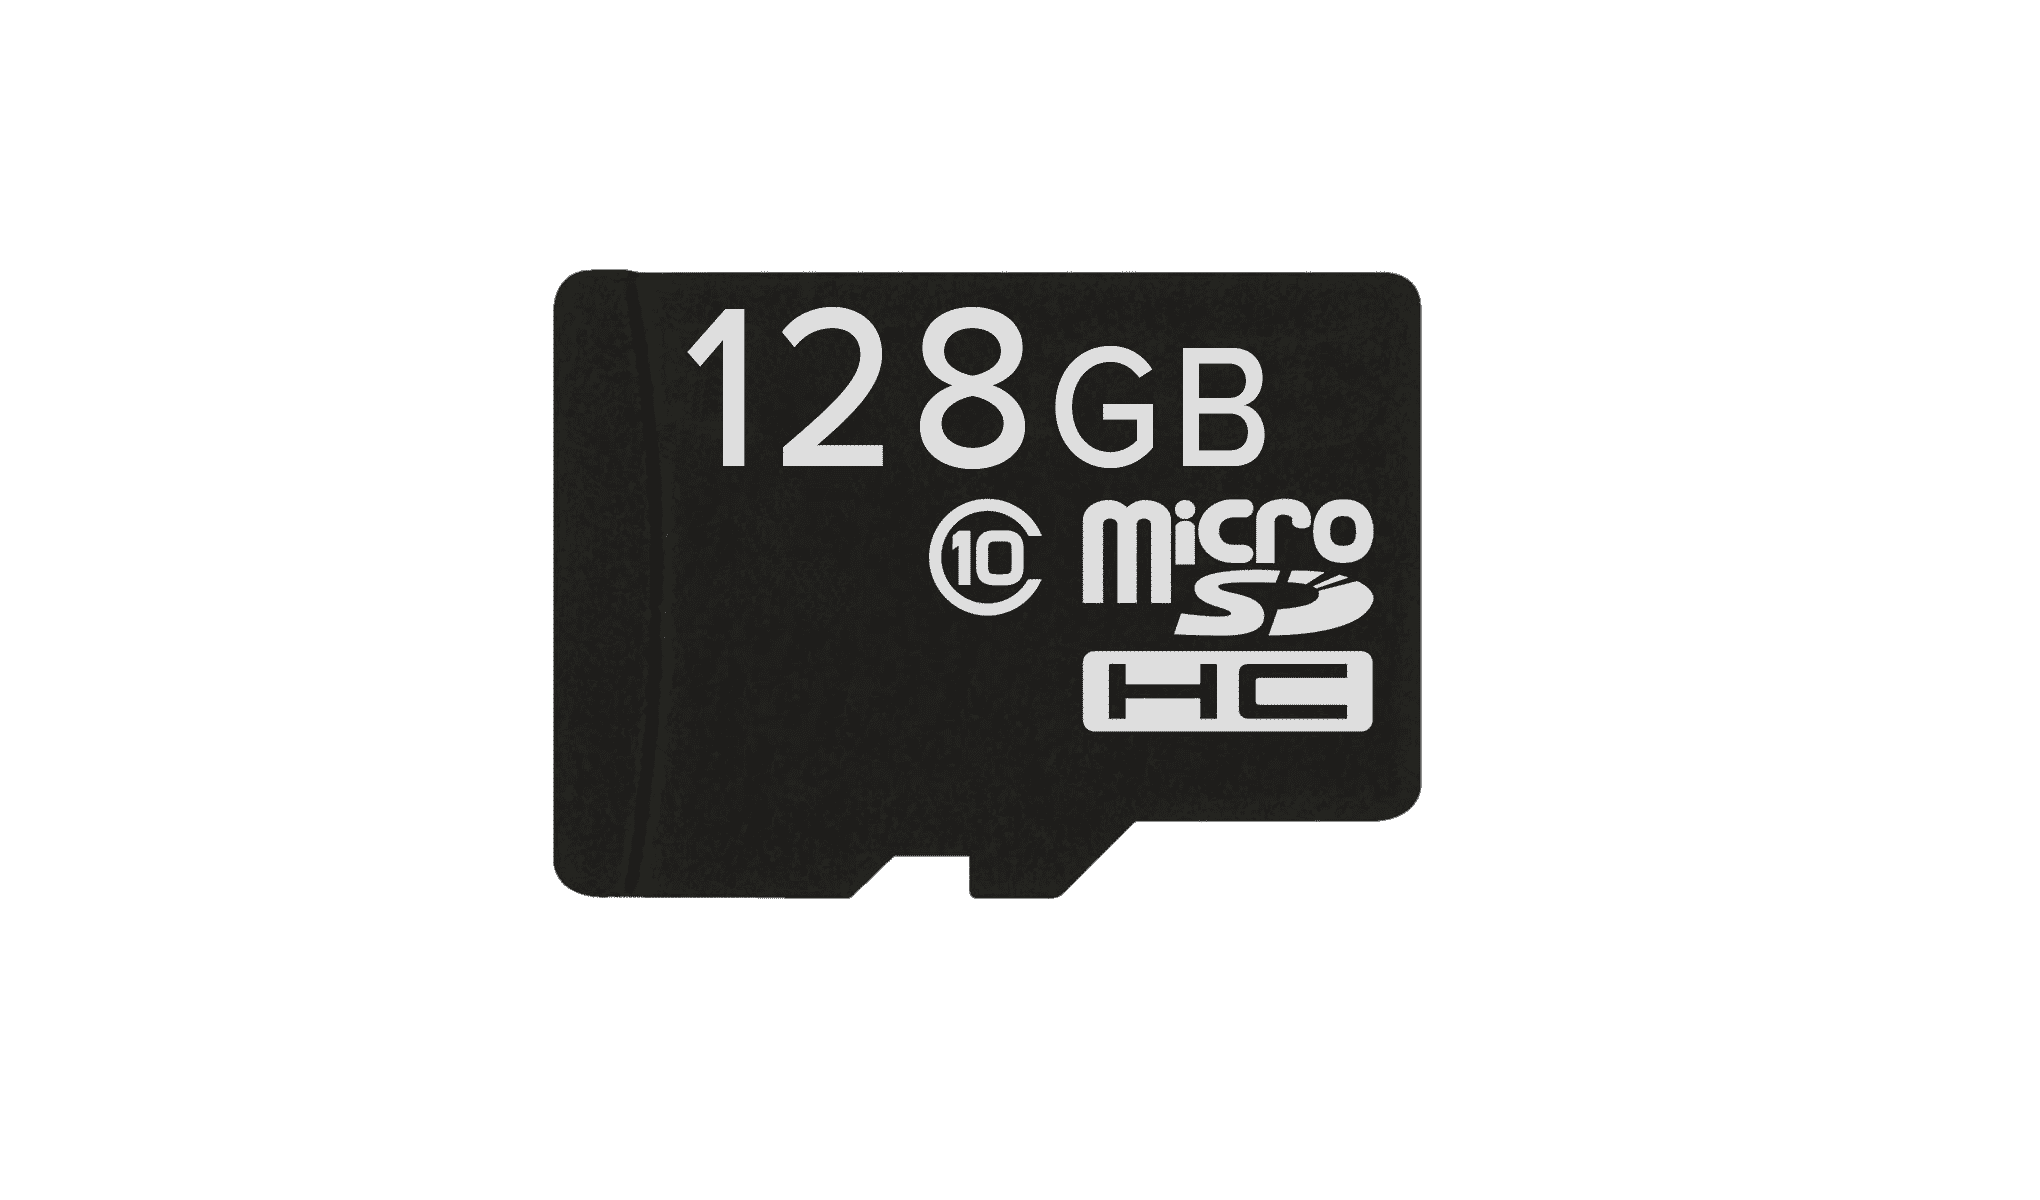 128GB MicroSD/TF Card for Smartphones,Tablets and Laptops